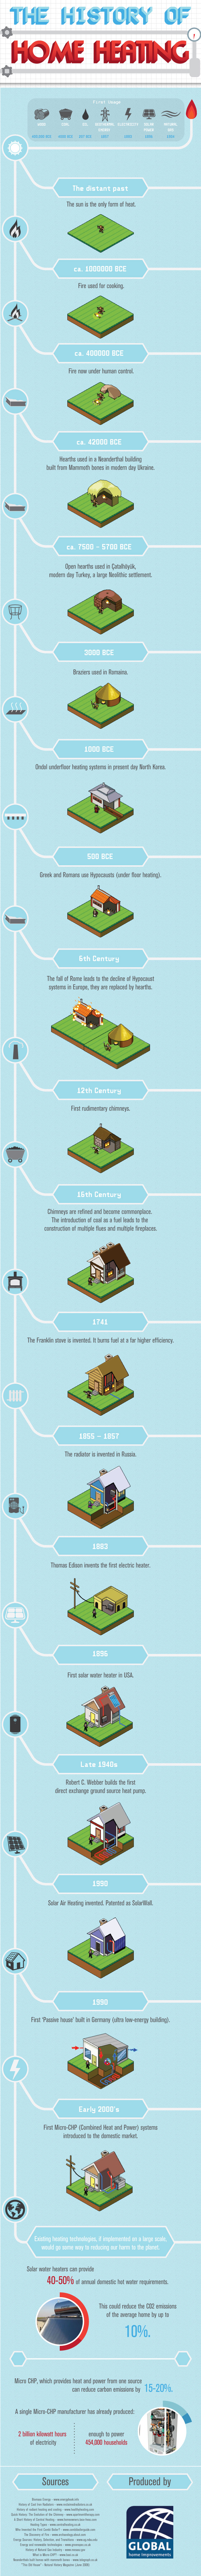 history-of-home-heating